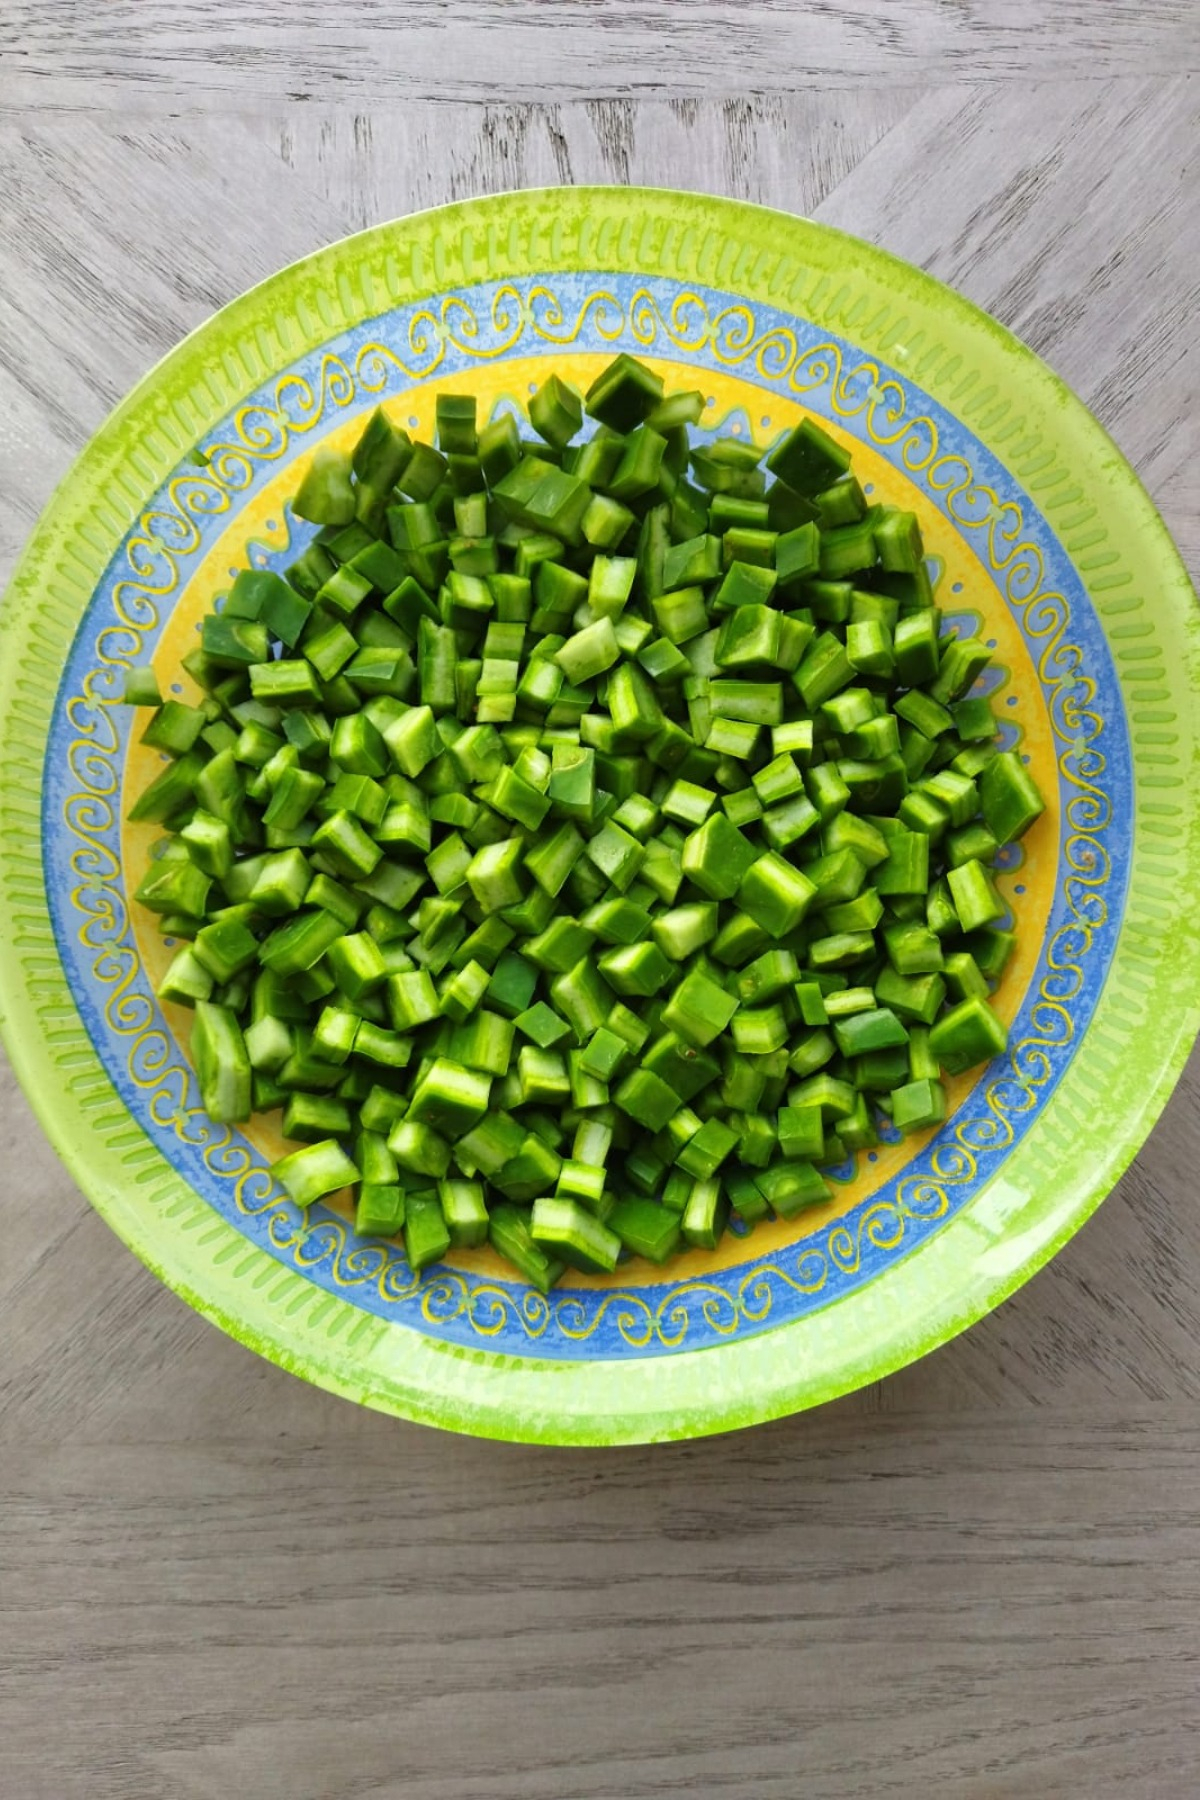 Diced nopales in a bowl.